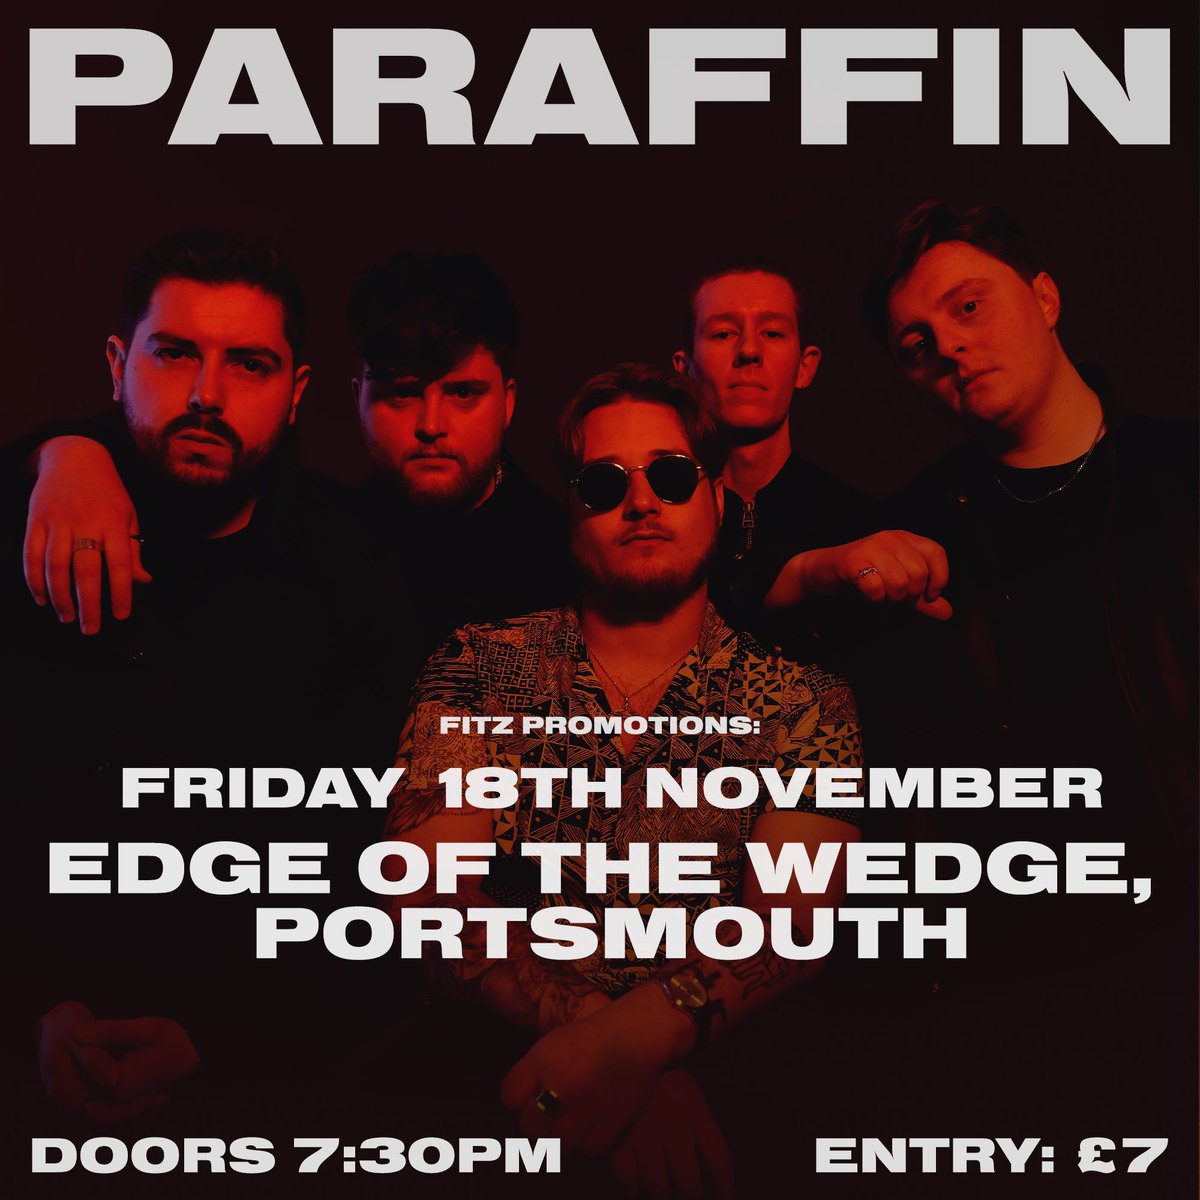 🌟Just Confirmed🌟 @fitz_promotions bring Pompey band @PARAFFINBAND to the Edge on Friday 18th November for their single release!😎 They sold out the Edge earlier this year, get your tickets for this show quick £7.00 in advance 👉 linktr.ee/thewedgewoodro… 👈